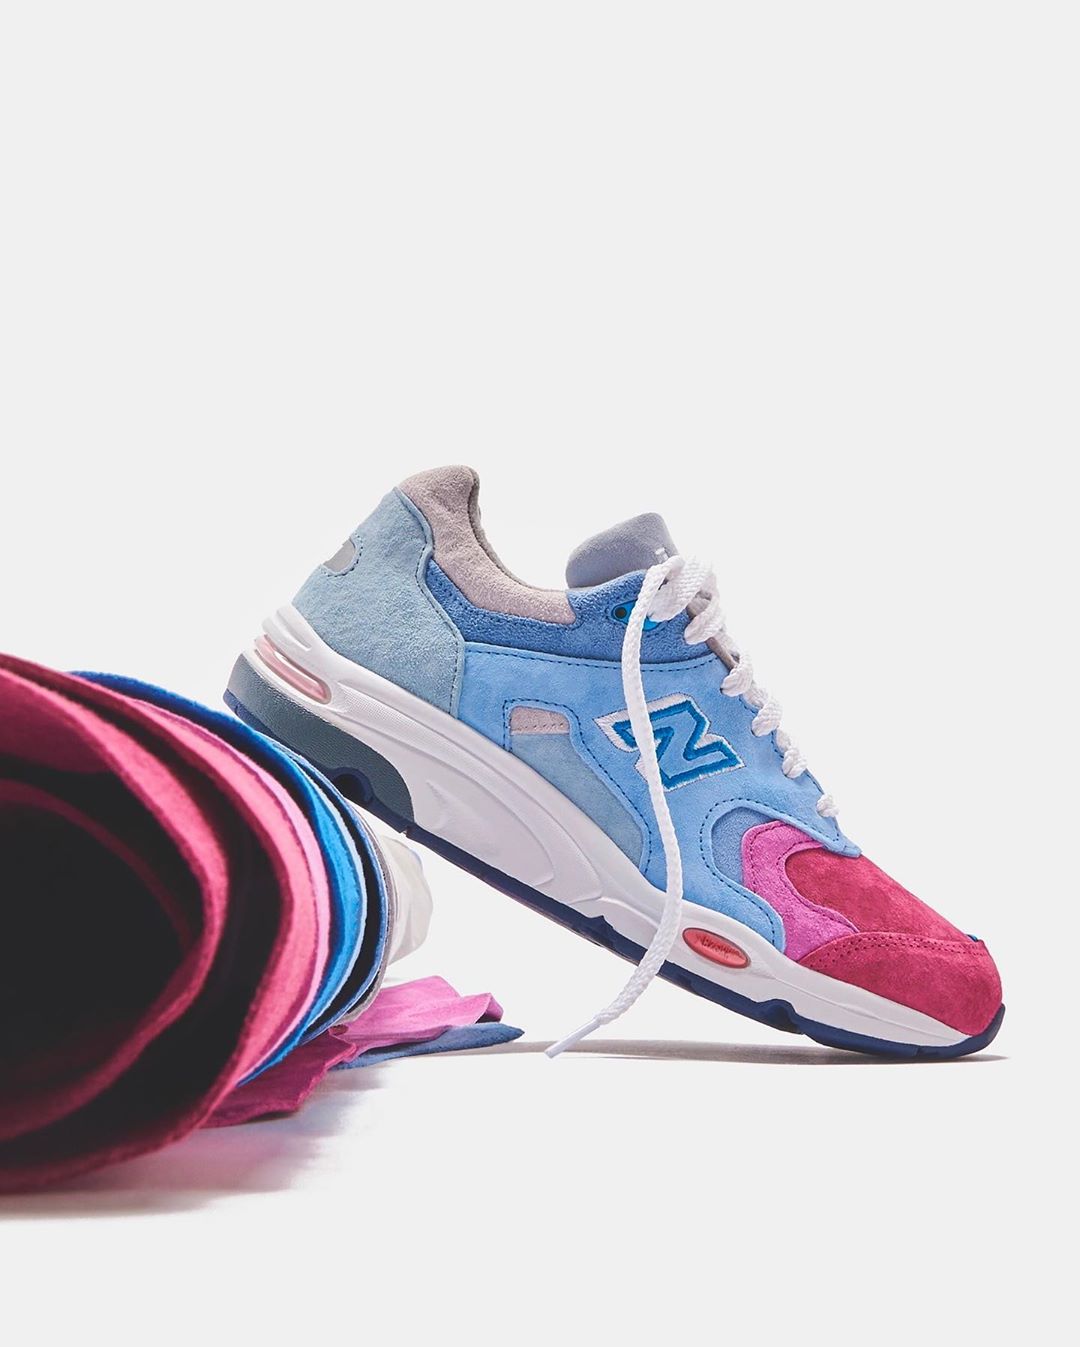 KITH x New Balance “The Colorist” Collection